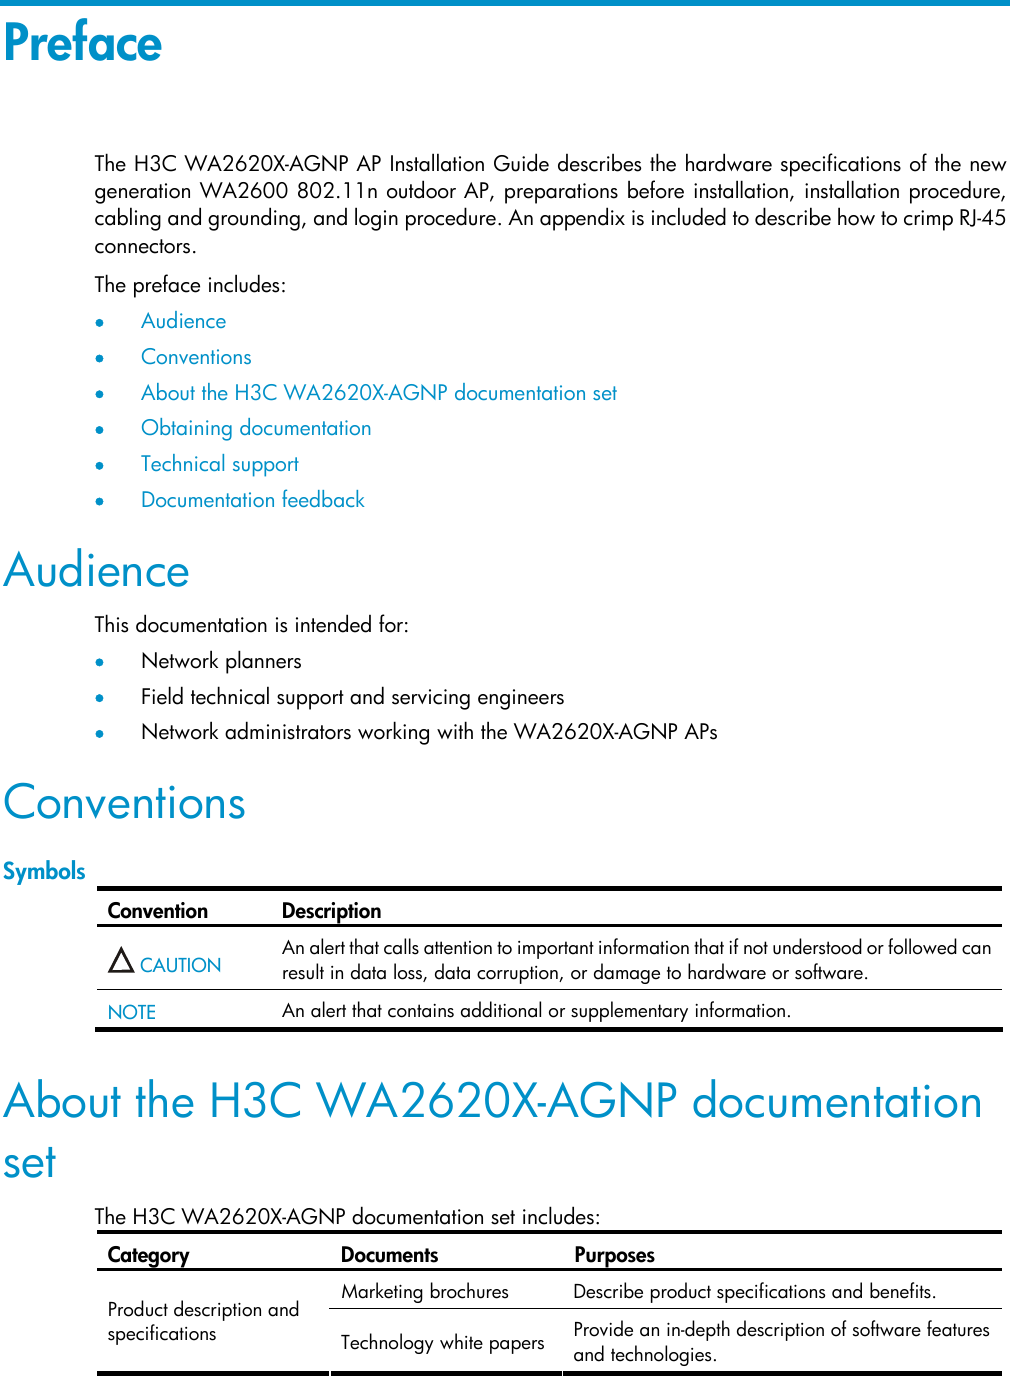 Preface The H3C WA2620X-AGNP AP Installation Guide describes the hardware specifications of the new generation WA2600 802.11n outdoor AP, preparations before installation, installation procedure, cabling and grounding, and login procedure. An appendix is included to describe how to crimp RJ-45 connectors.  The preface includes:  • Audience • Conventions • About the H3C WA2620X-AGNP documentation set  • Obtaining documentation • Technical support • Documentation feedback Audience This documentation is intended for:  • Network planners • Field technical support and servicing engineers • Network administrators working with the WA2620X-AGNP APs Conventions Symbols Convention Description  CAUTION  An alert that calls attention to important information that if not understood or followed can result in data loss, data corruption, or damage to hardware or software.  NOTE  An alert that contains additional or supplementary information.  About the H3C WA2620X-AGNP documentation set The H3C WA2620X-AGNP documentation set includes: Category Documents Purposes Marketing brochures  Describe product specifications and benefits.  Product description and specifications  Technology white papers Provide an in-depth description of software features and technologies.  